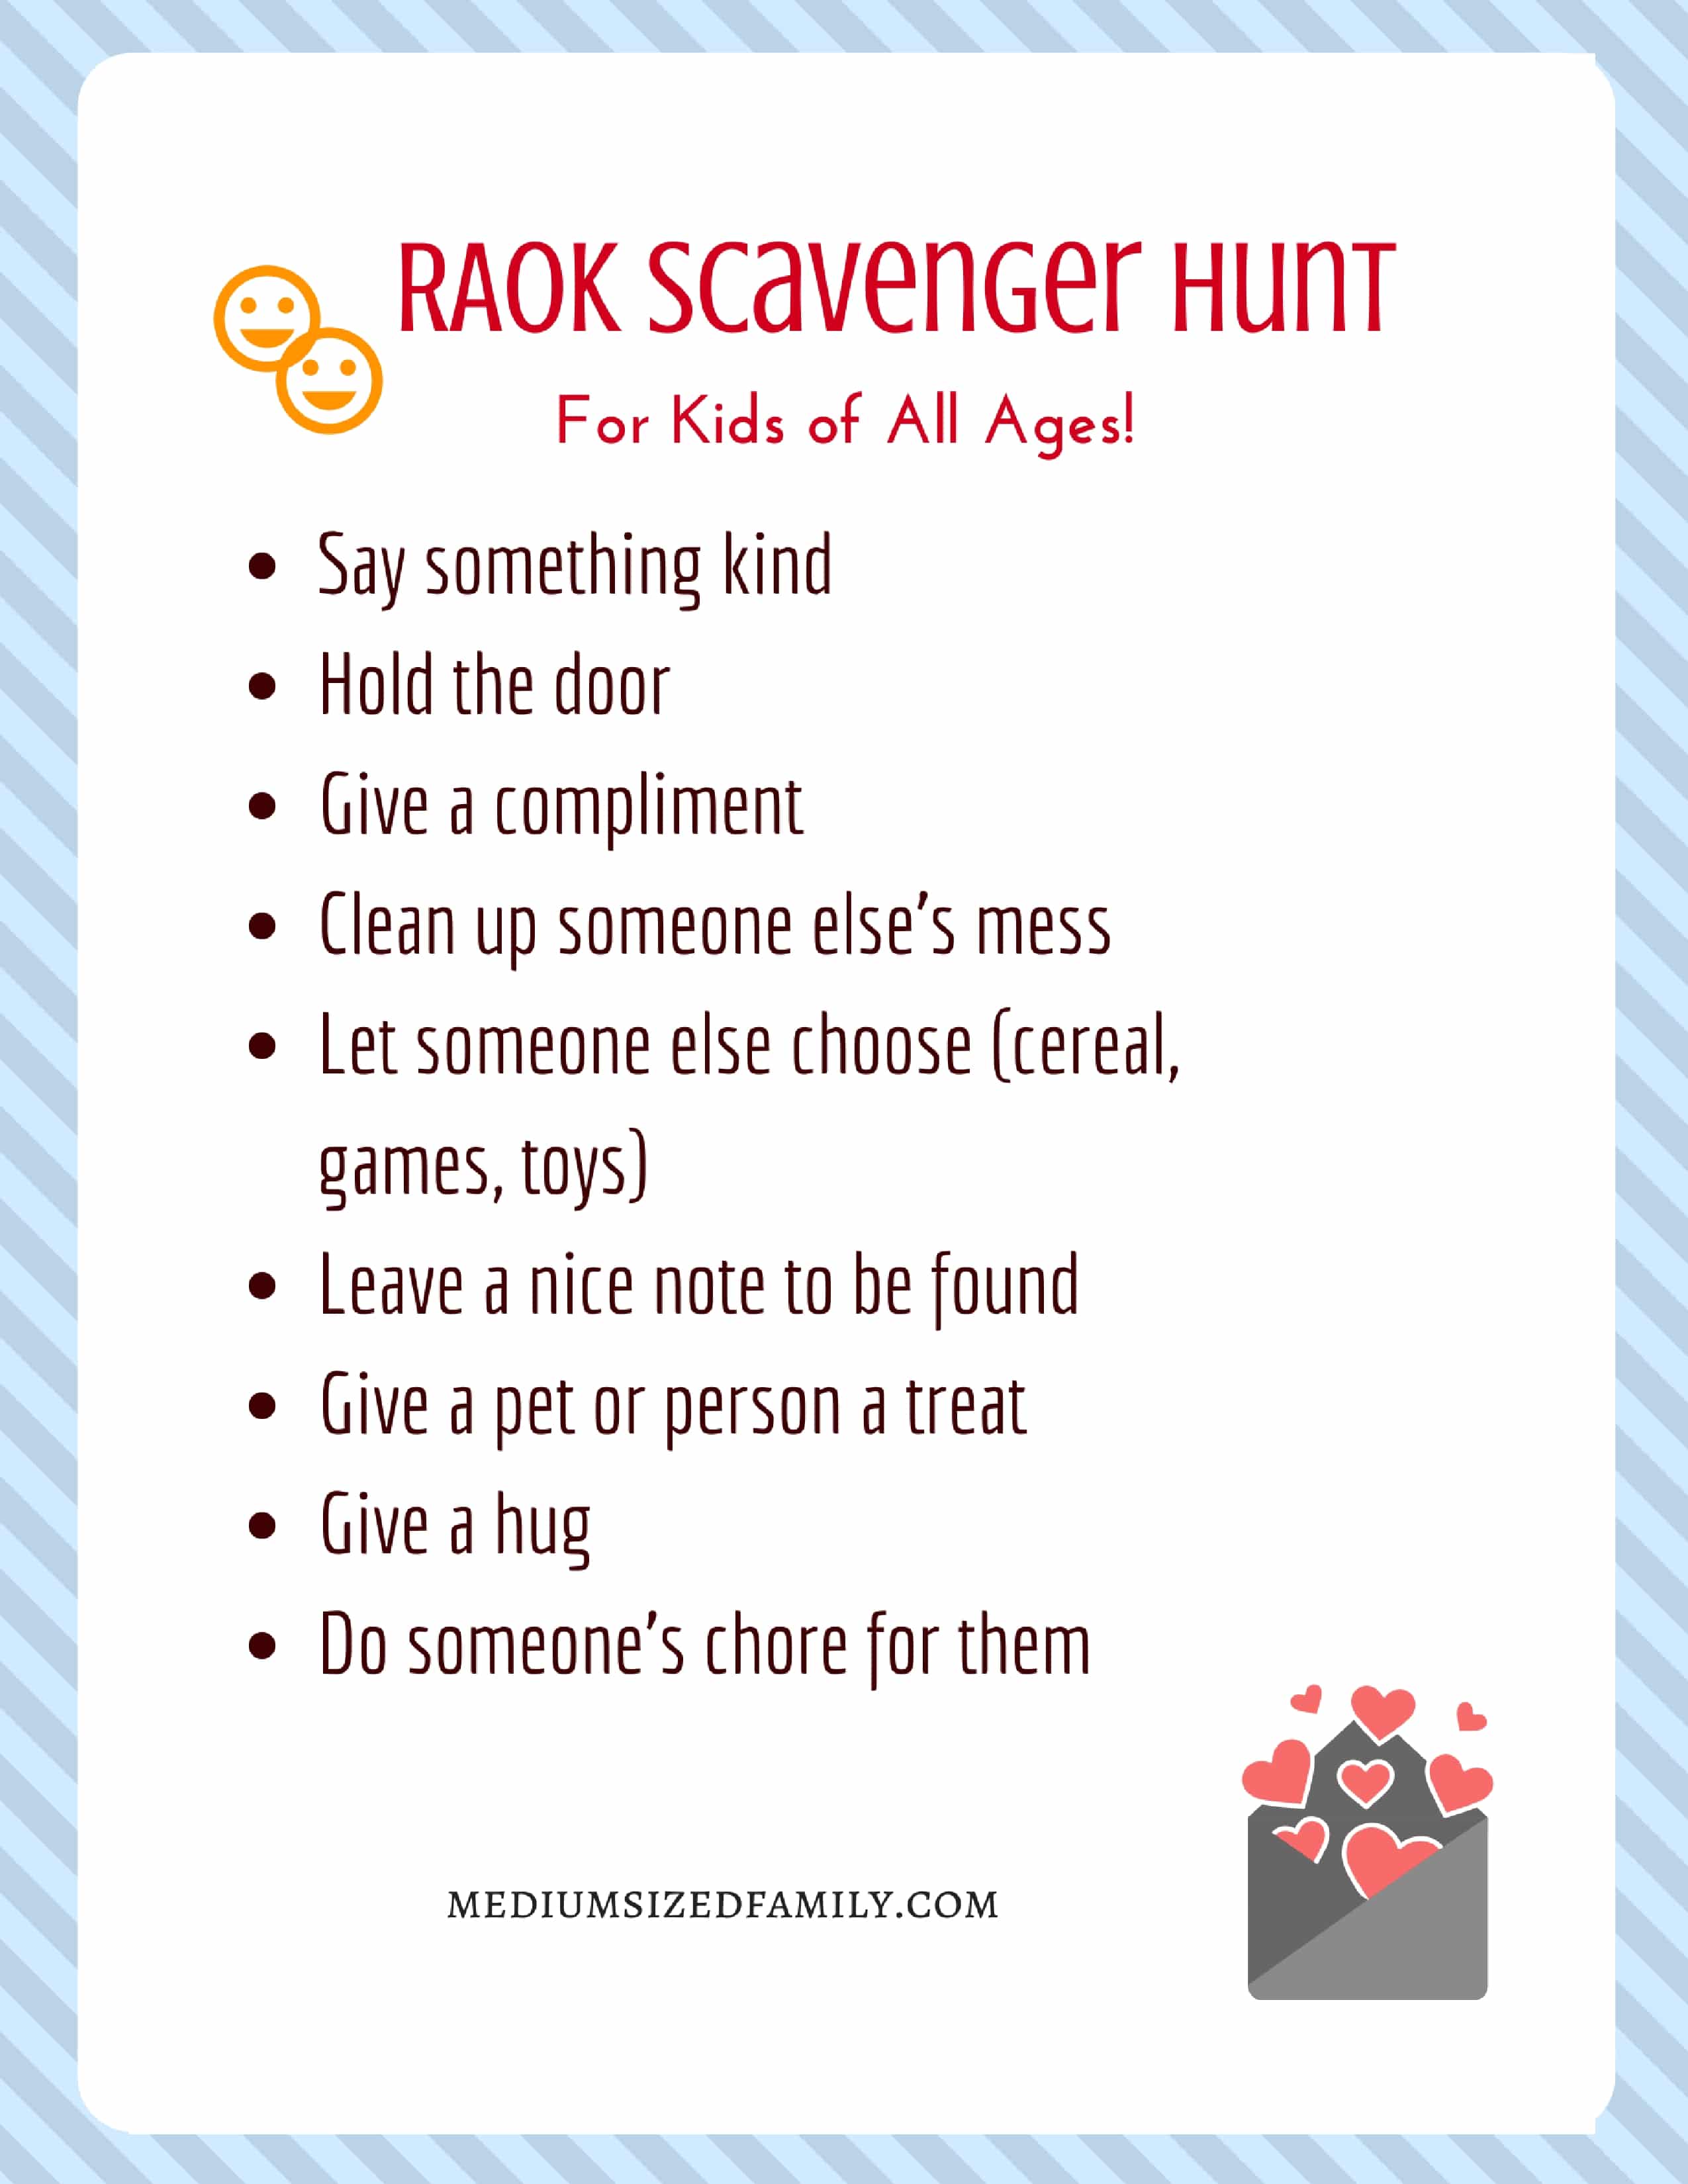 Free printable pdf with ways to show kindness.